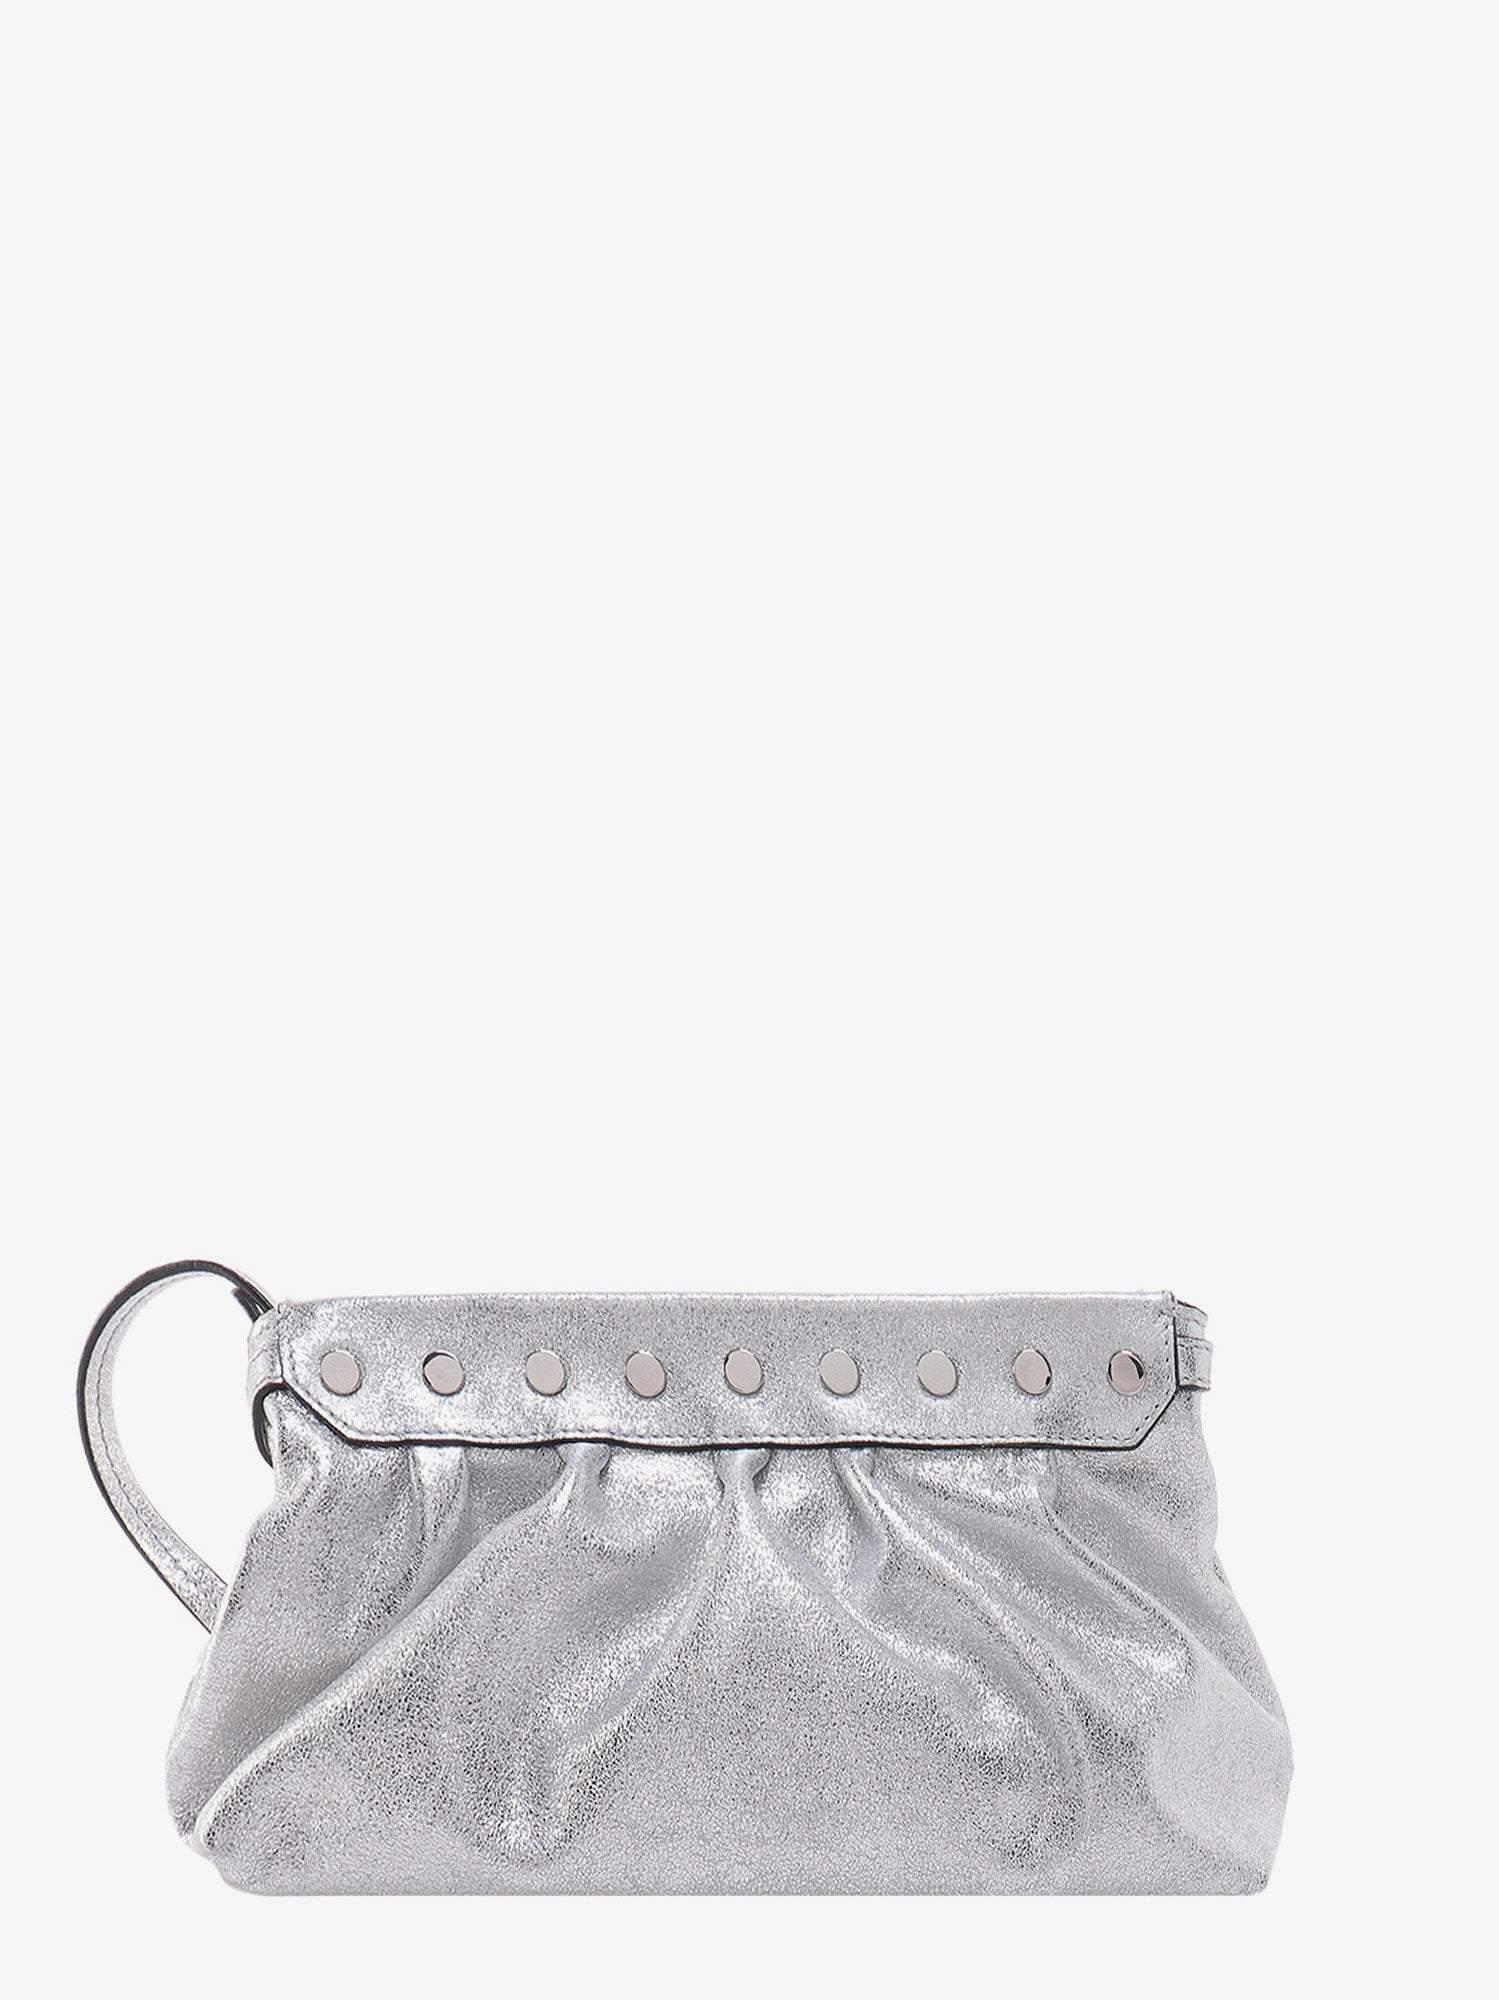 Isabel Marant Leather Closure With Zip Shoulder Bags in White | Lyst UK